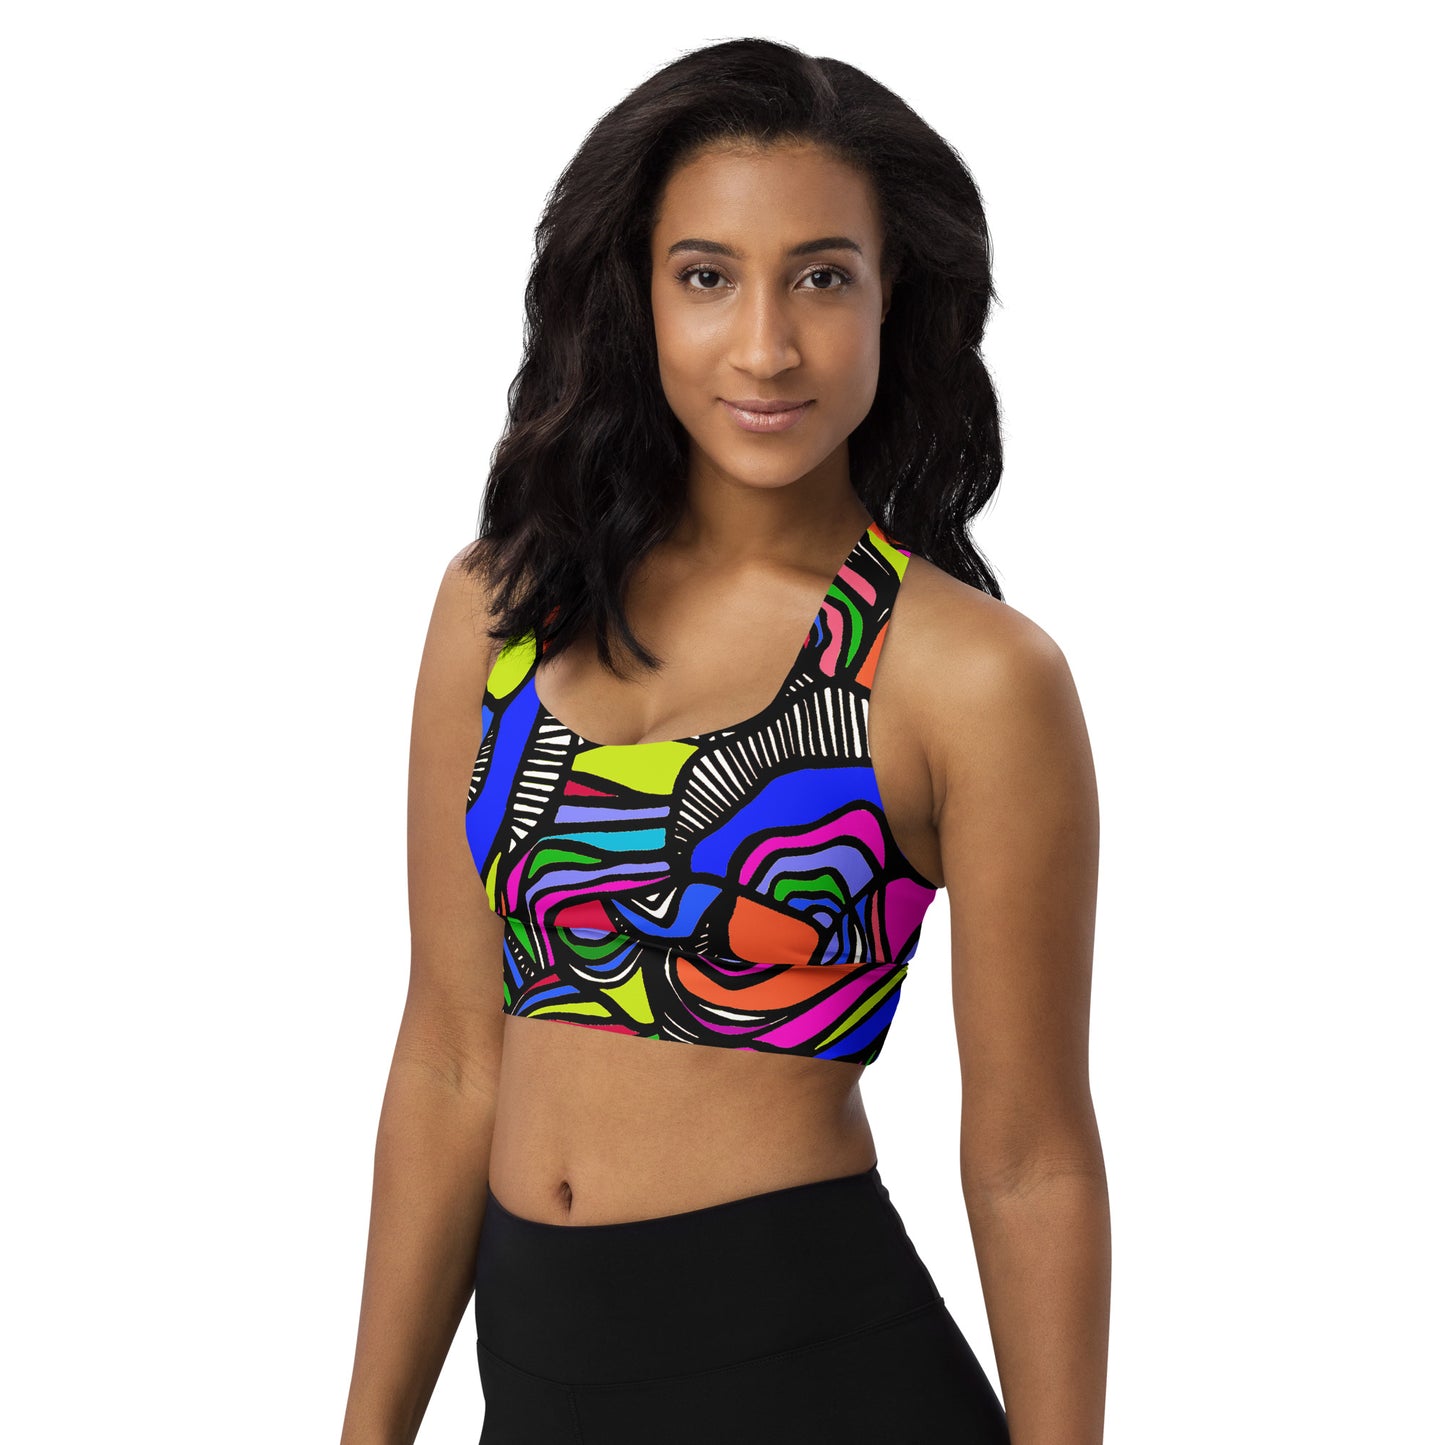 It's a Colorful Whirled Longline Sports Bra